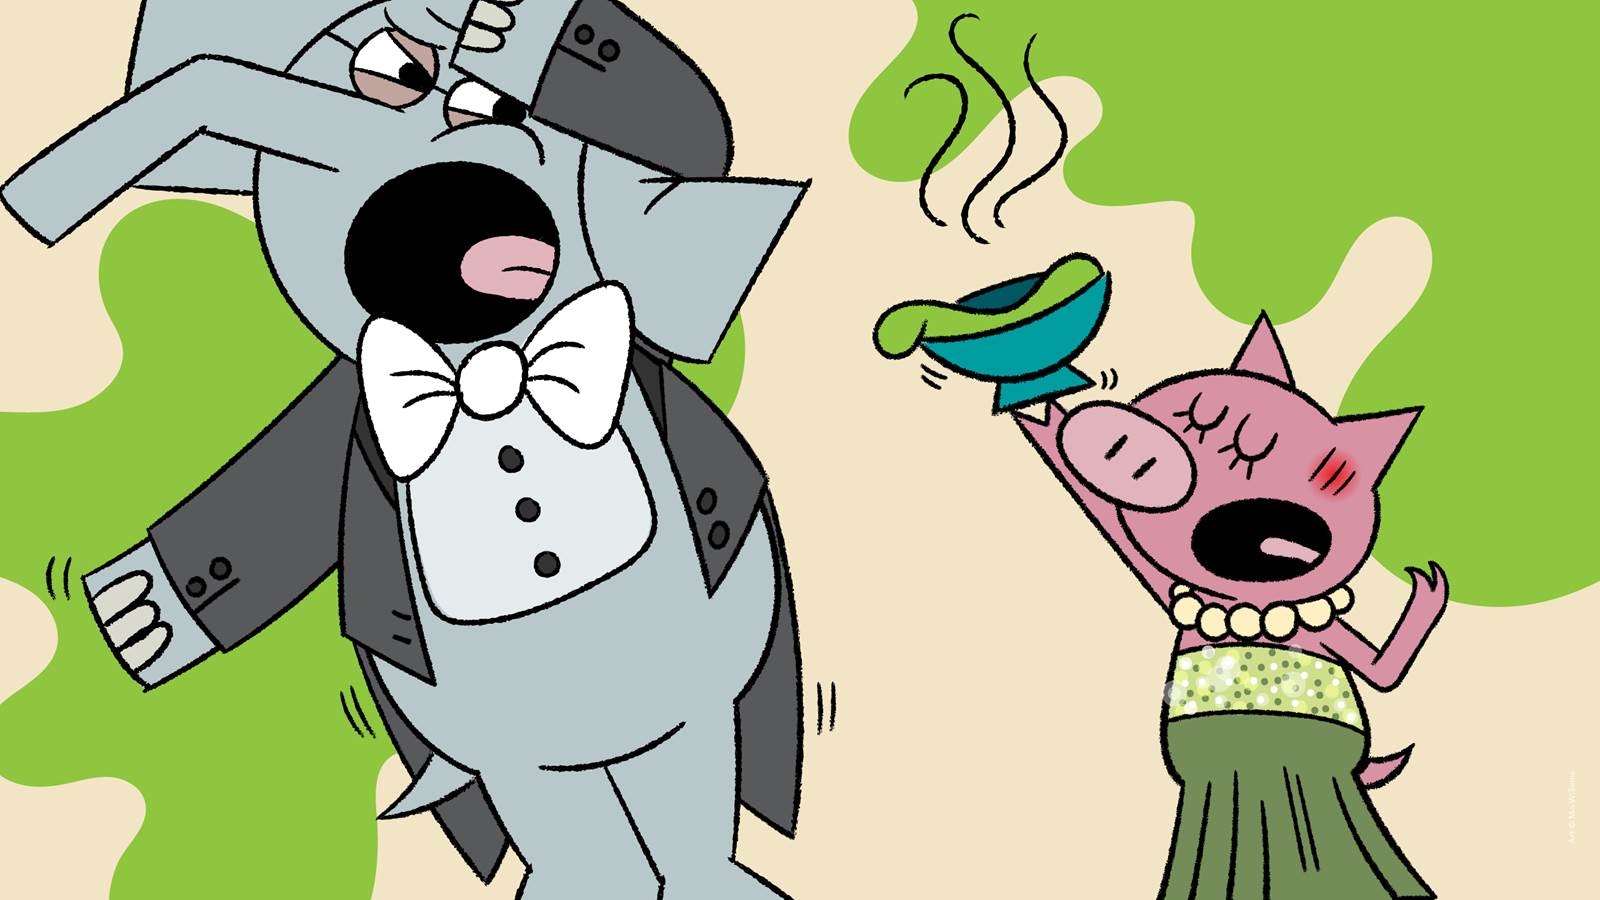 A cartoon elephant wearing a black tuxedo jacket with tails and a white bowtie has his mouth wide open and his eyes looking to the right is leaning to the left away from a cartoon pig who is wearing a green strapless gown and pearl necklace. Her eyes are closed and her mouth is also wide open and she is holding up a bowl of green slop towards the elephant.